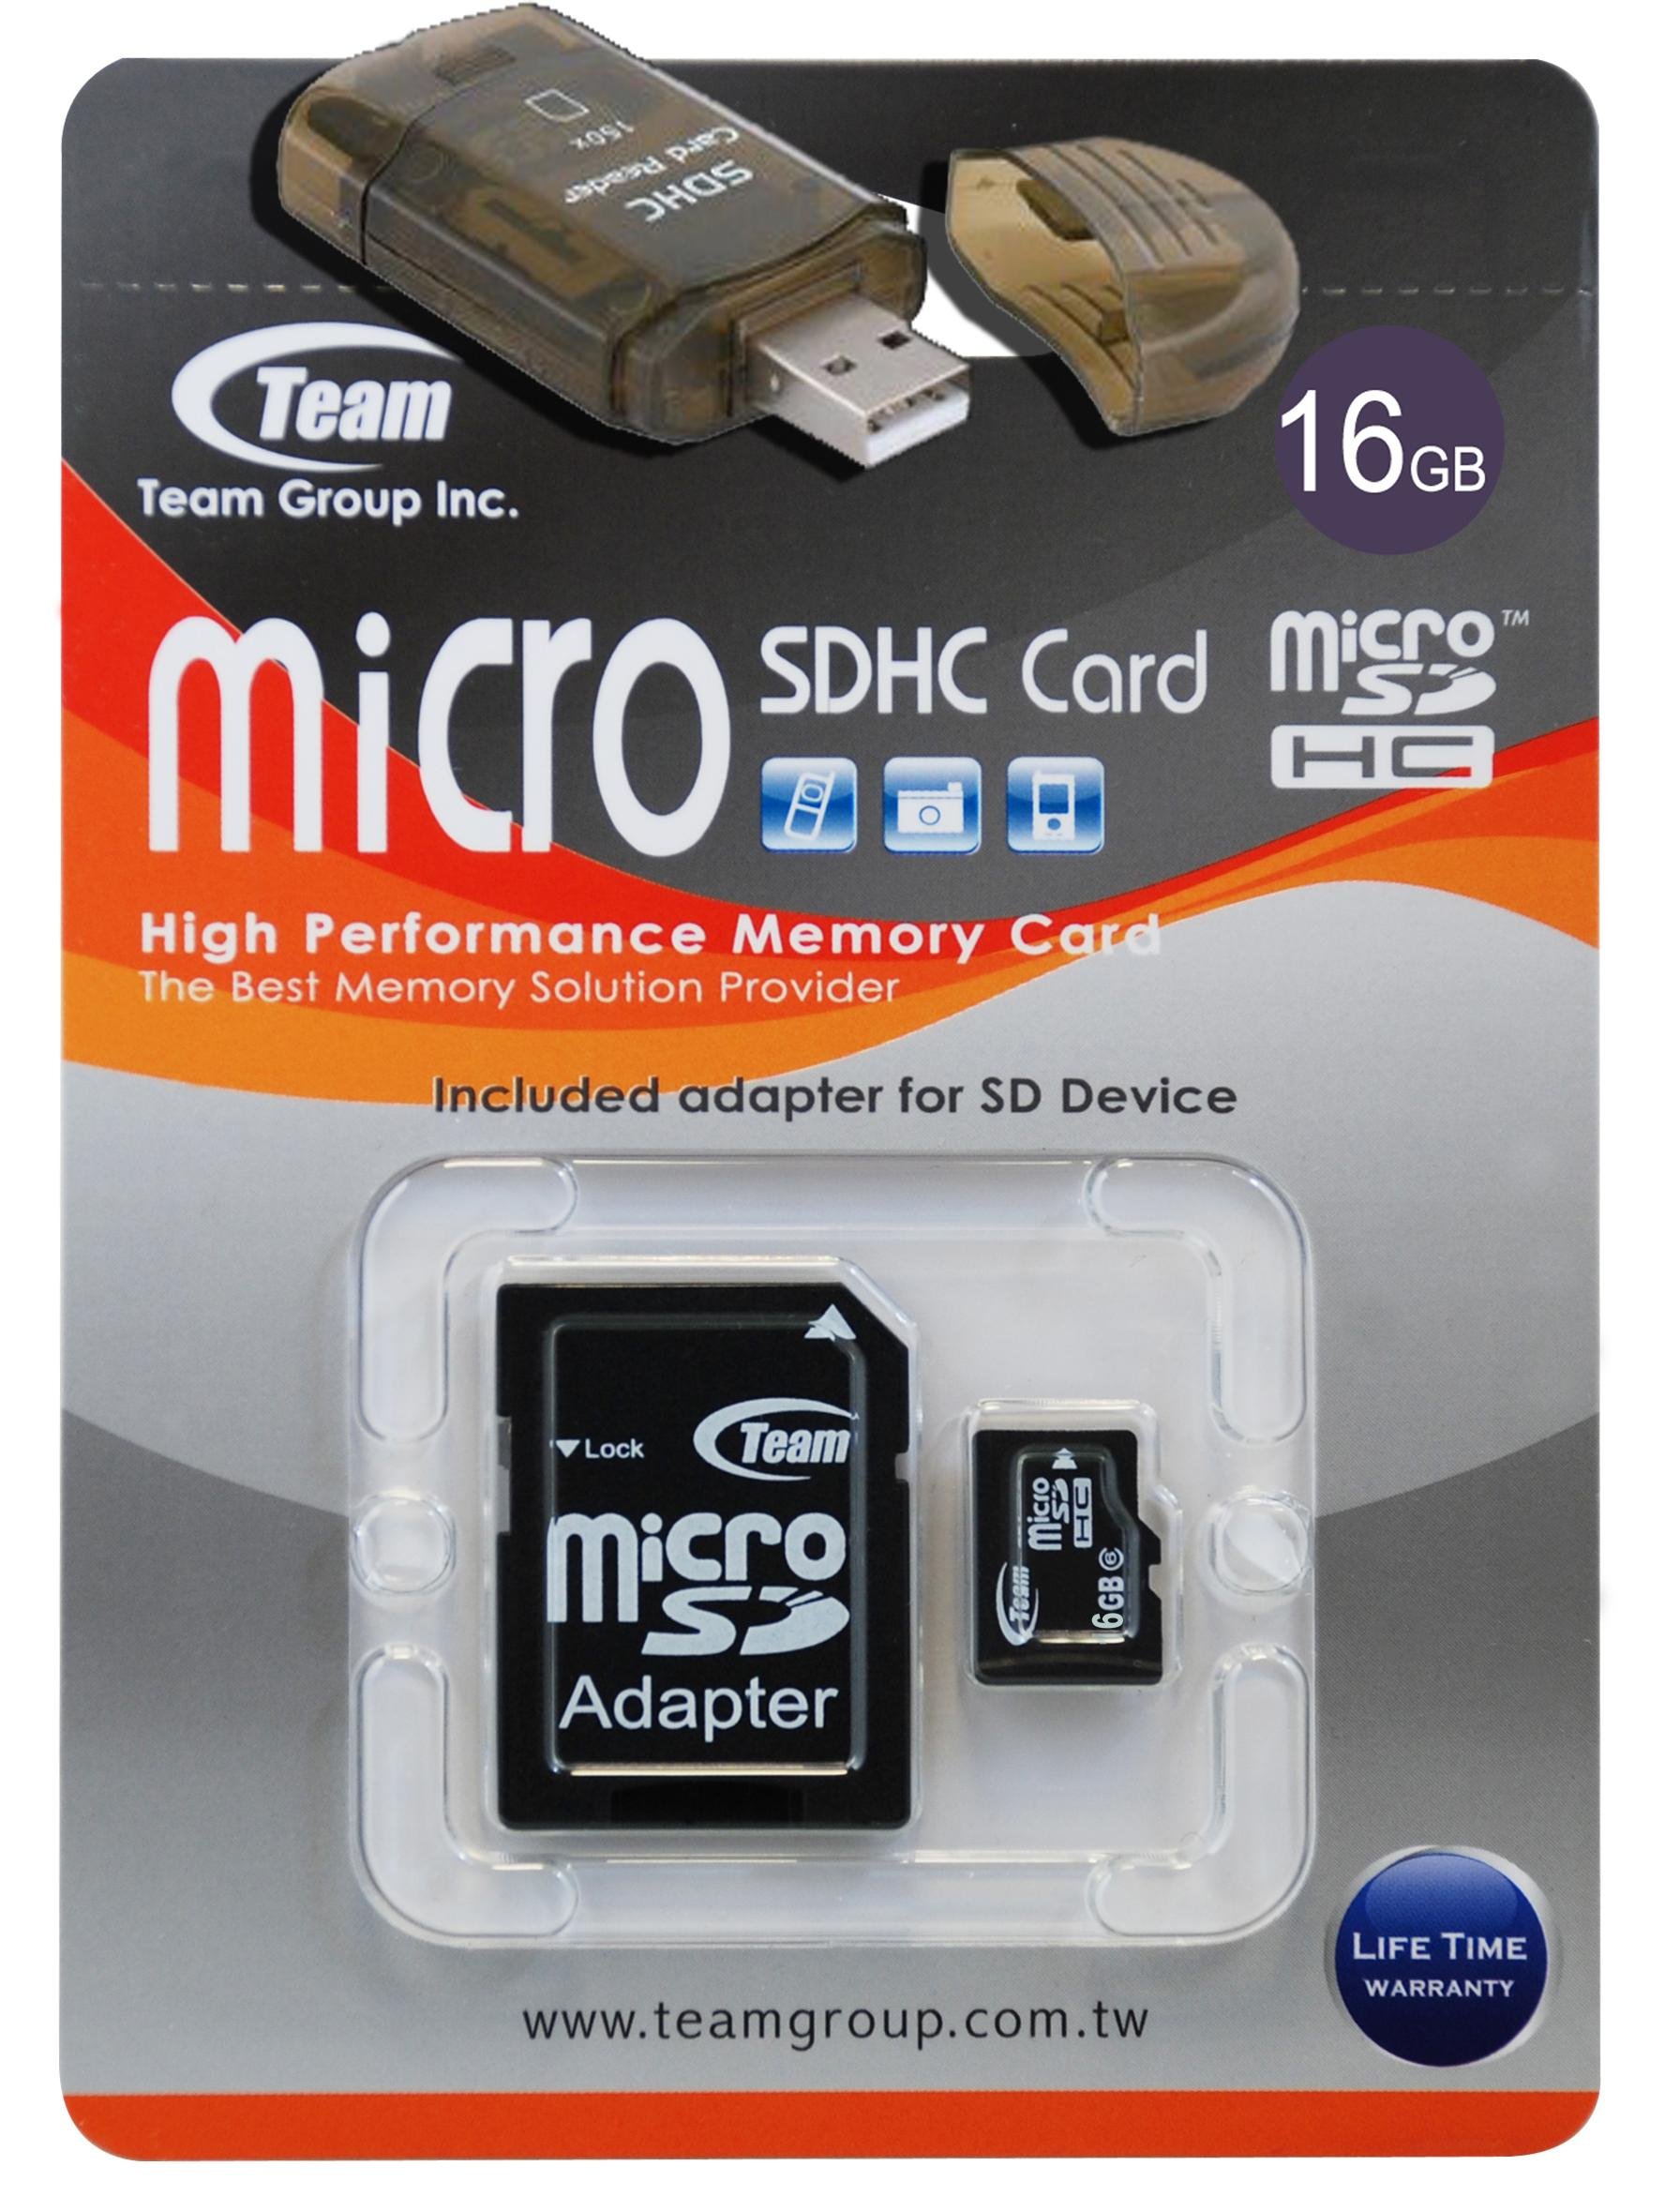 16GB Turbo Speed Class 6 MicroSDHC Memory Card For SAMSUNG GT-S5550 GT-S5600. High Speed Card Comes with a free SD and USB Ad